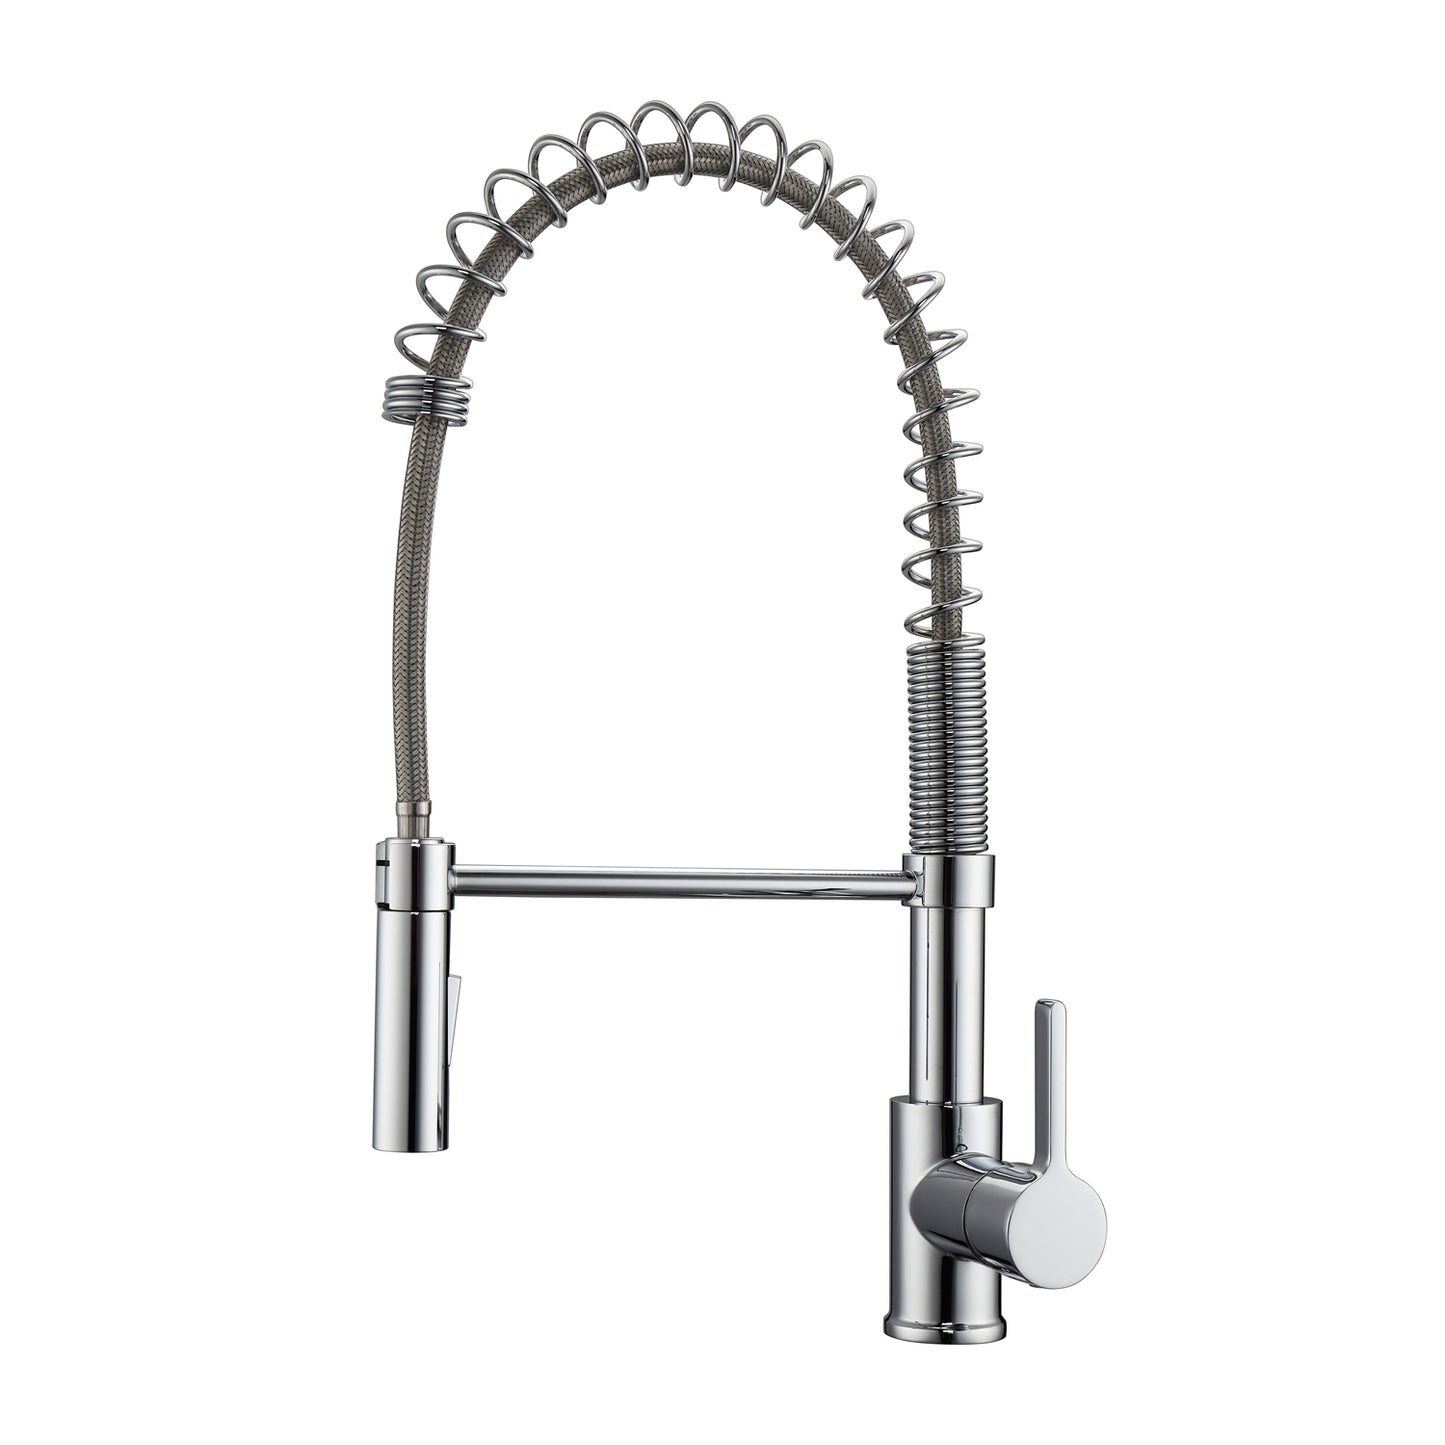 Nikita 1 Kitchen Faucet, Spring, Pull-out Sprayer, Lever Handle, Chrome